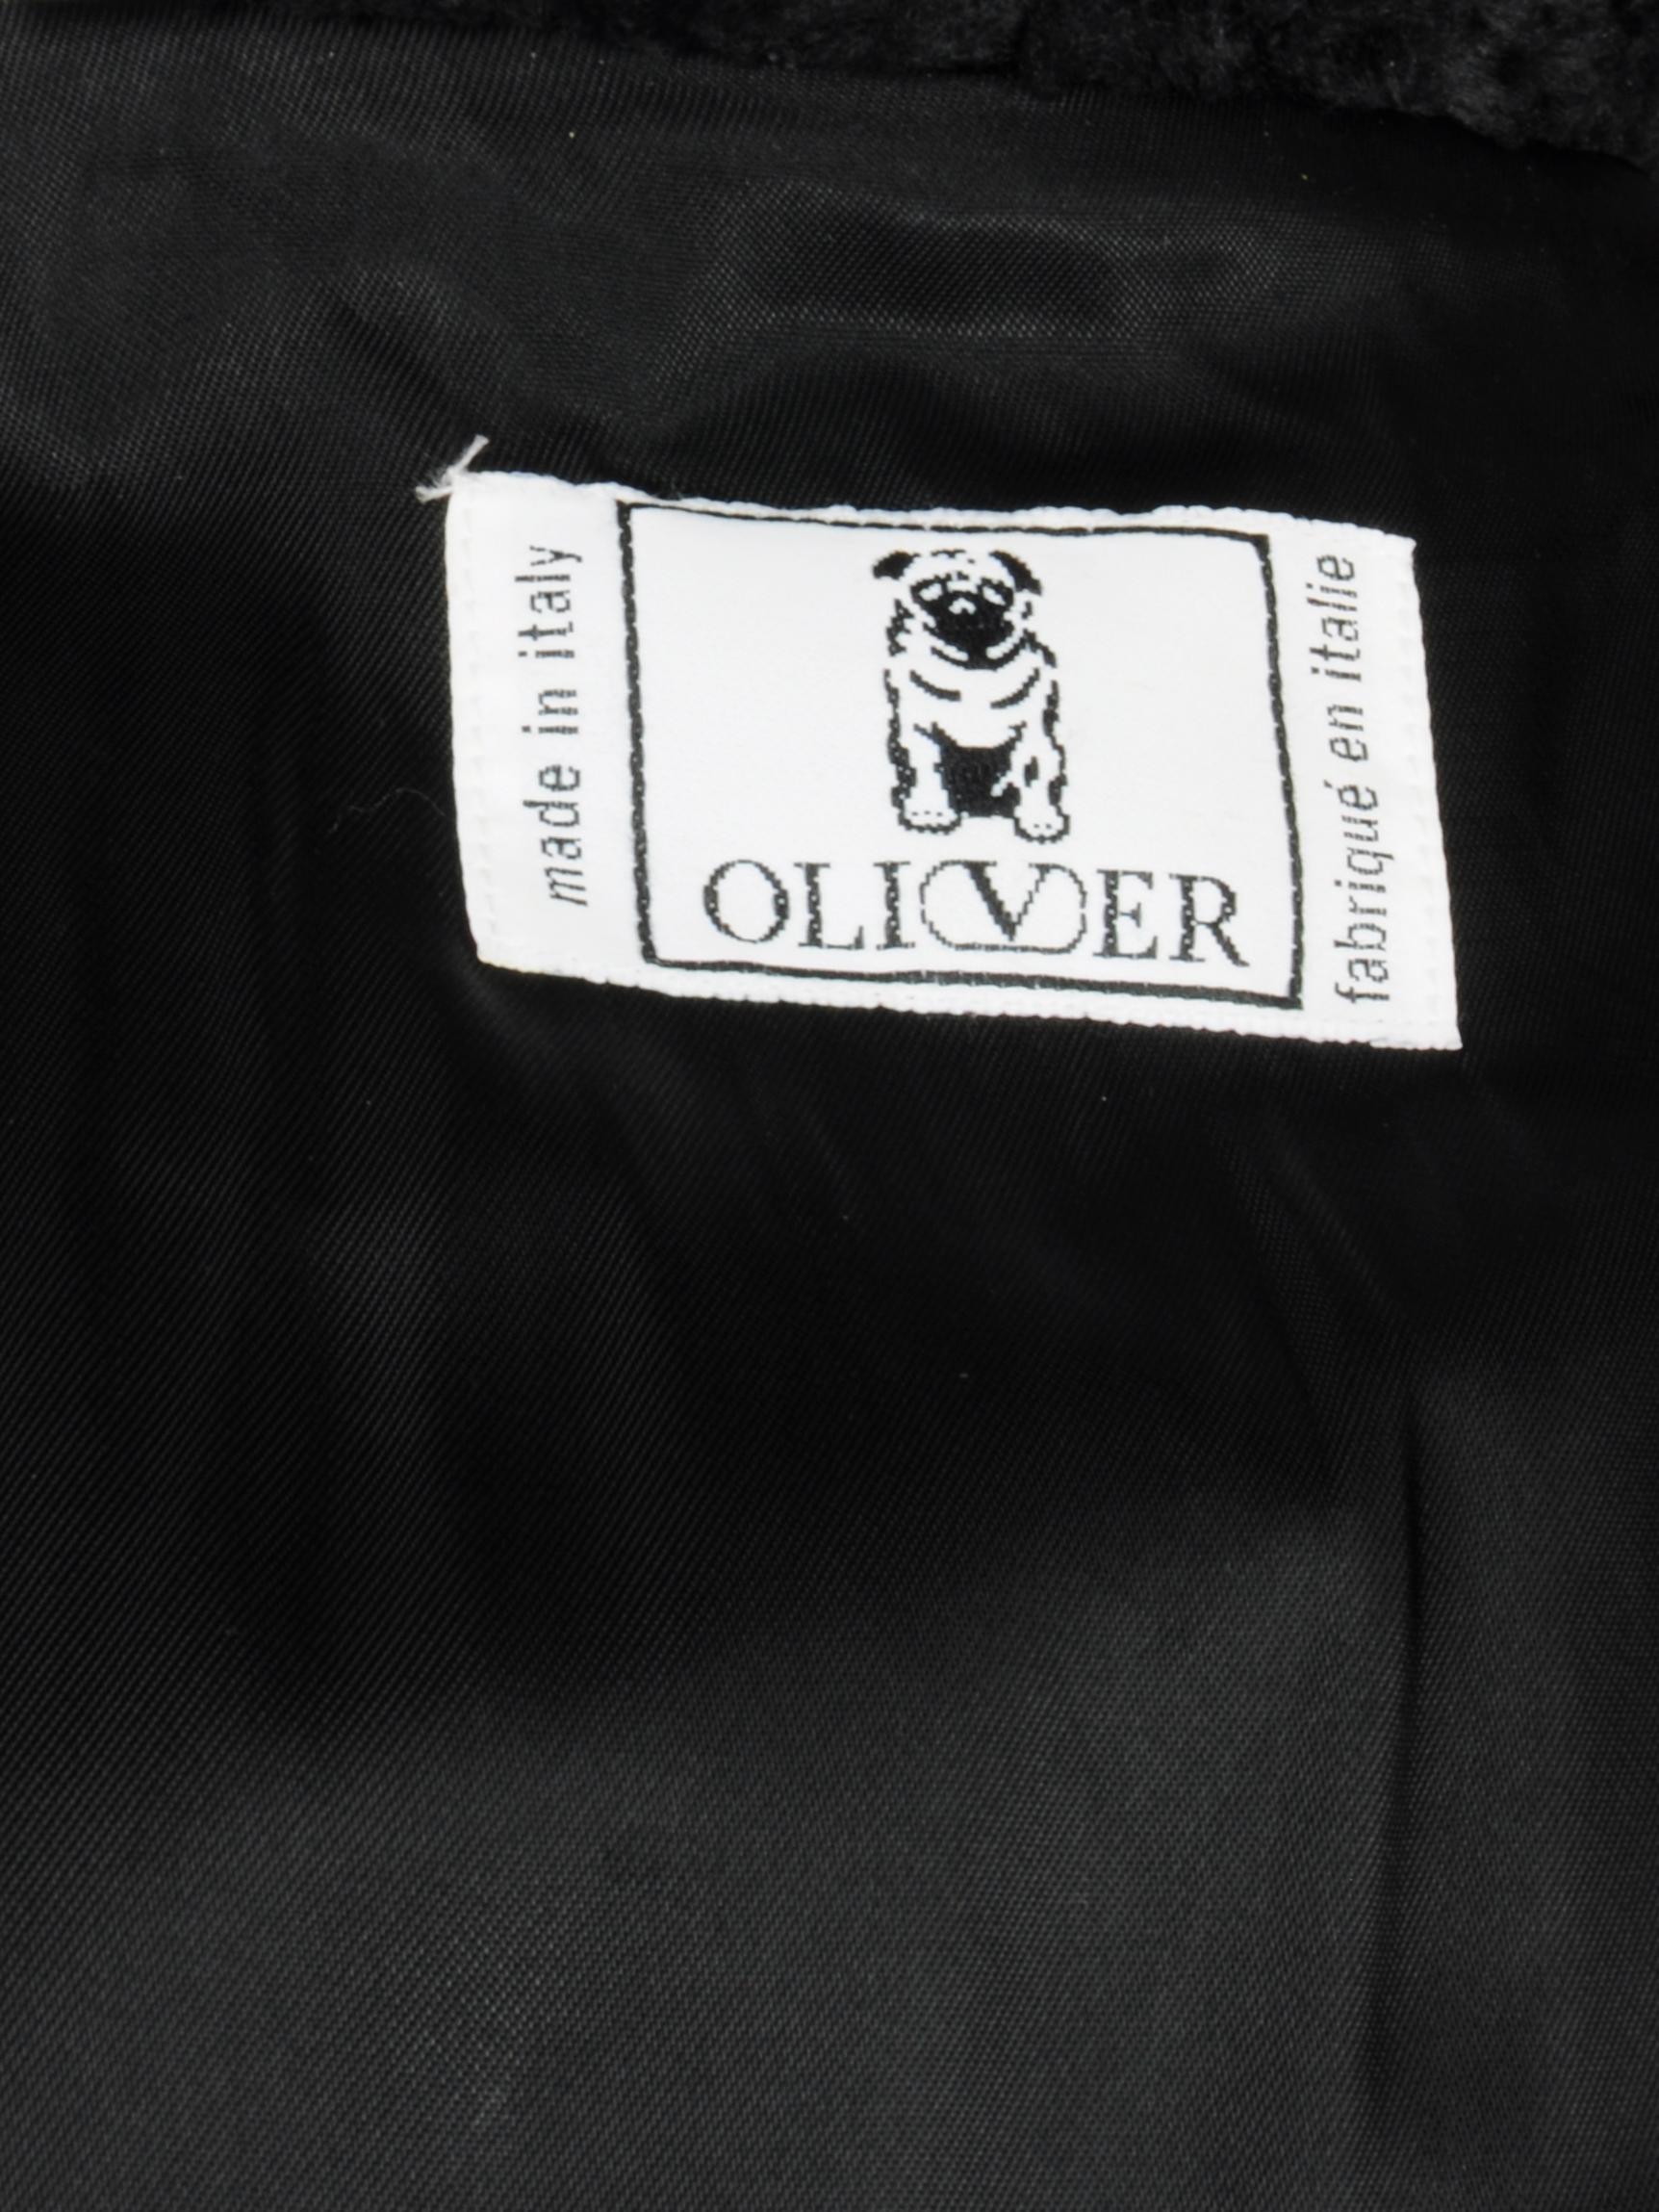 Oliver by Valentino Faux Astrakan Fur Double Breasted Coat Shawl Collar 1990s For Sale 4